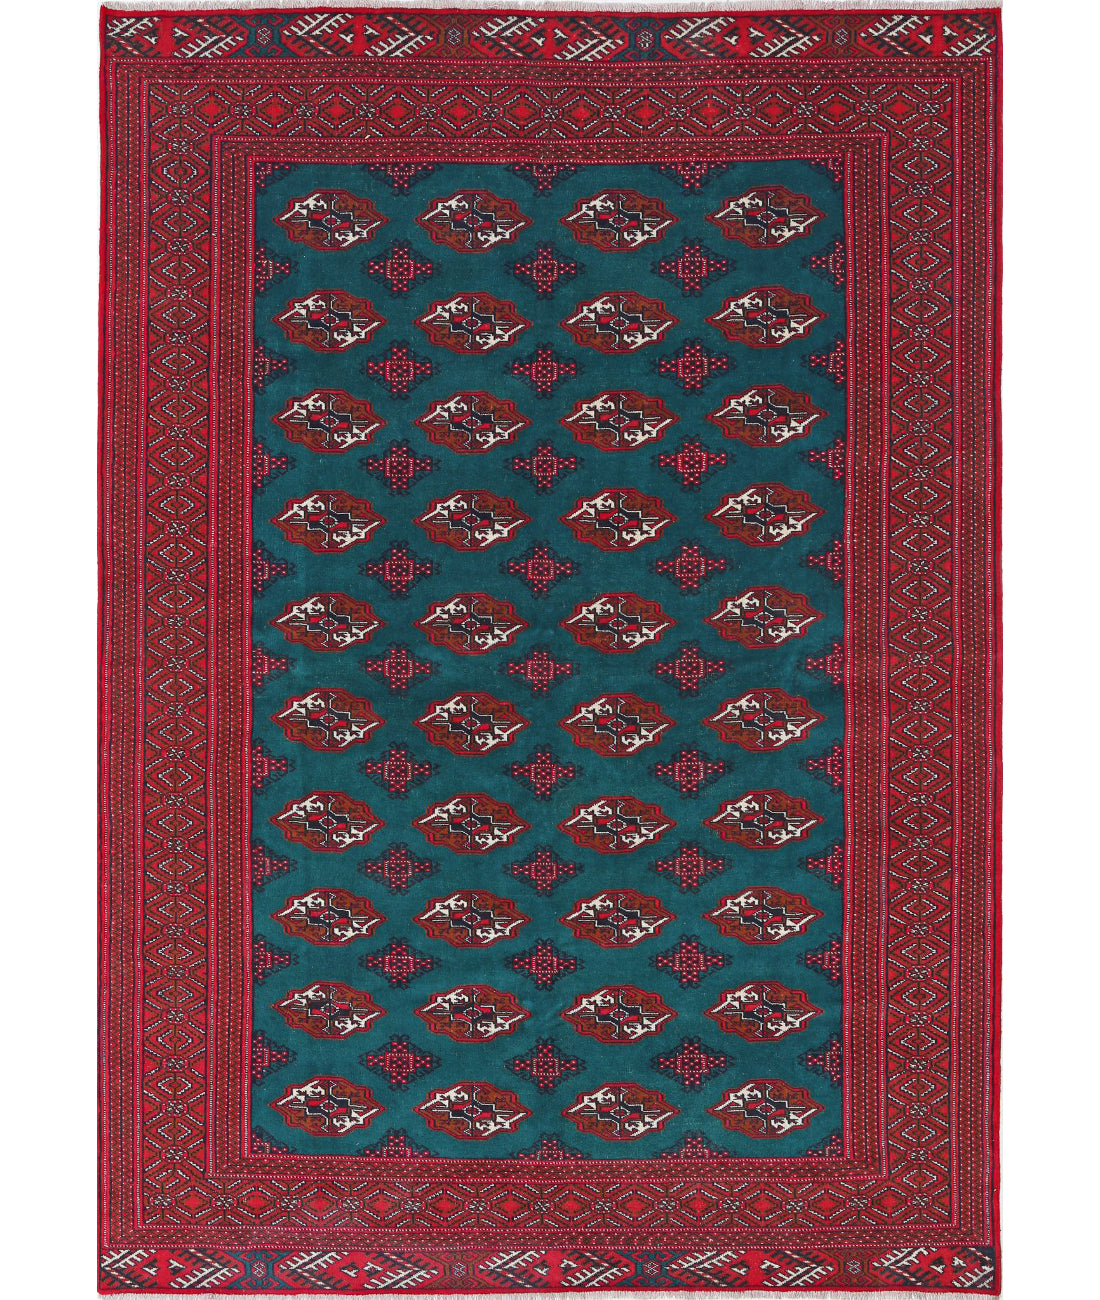 Hand Knotted Tribal Bokhara Wool Rug - 6&#39;2&#39;&#39; x 9&#39;7&#39;&#39; 6&#39;2&#39;&#39; x 9&#39;7&#39;&#39; (185 X 288) / Green / Red